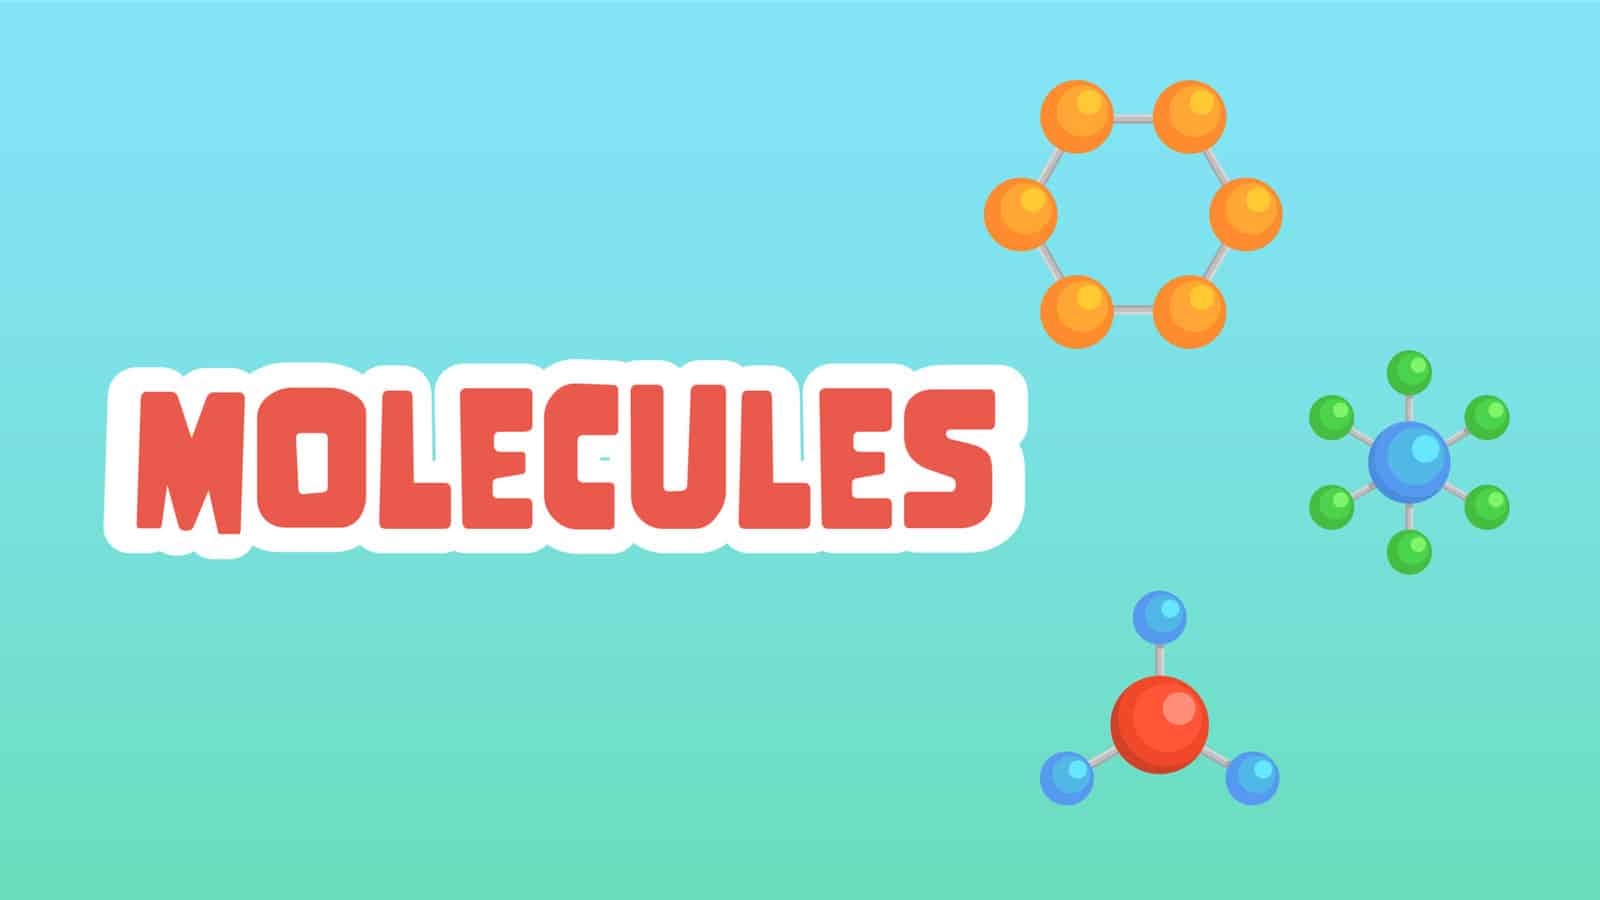 Molecules Facts for Kids – 5 Magical Facts about Molecules